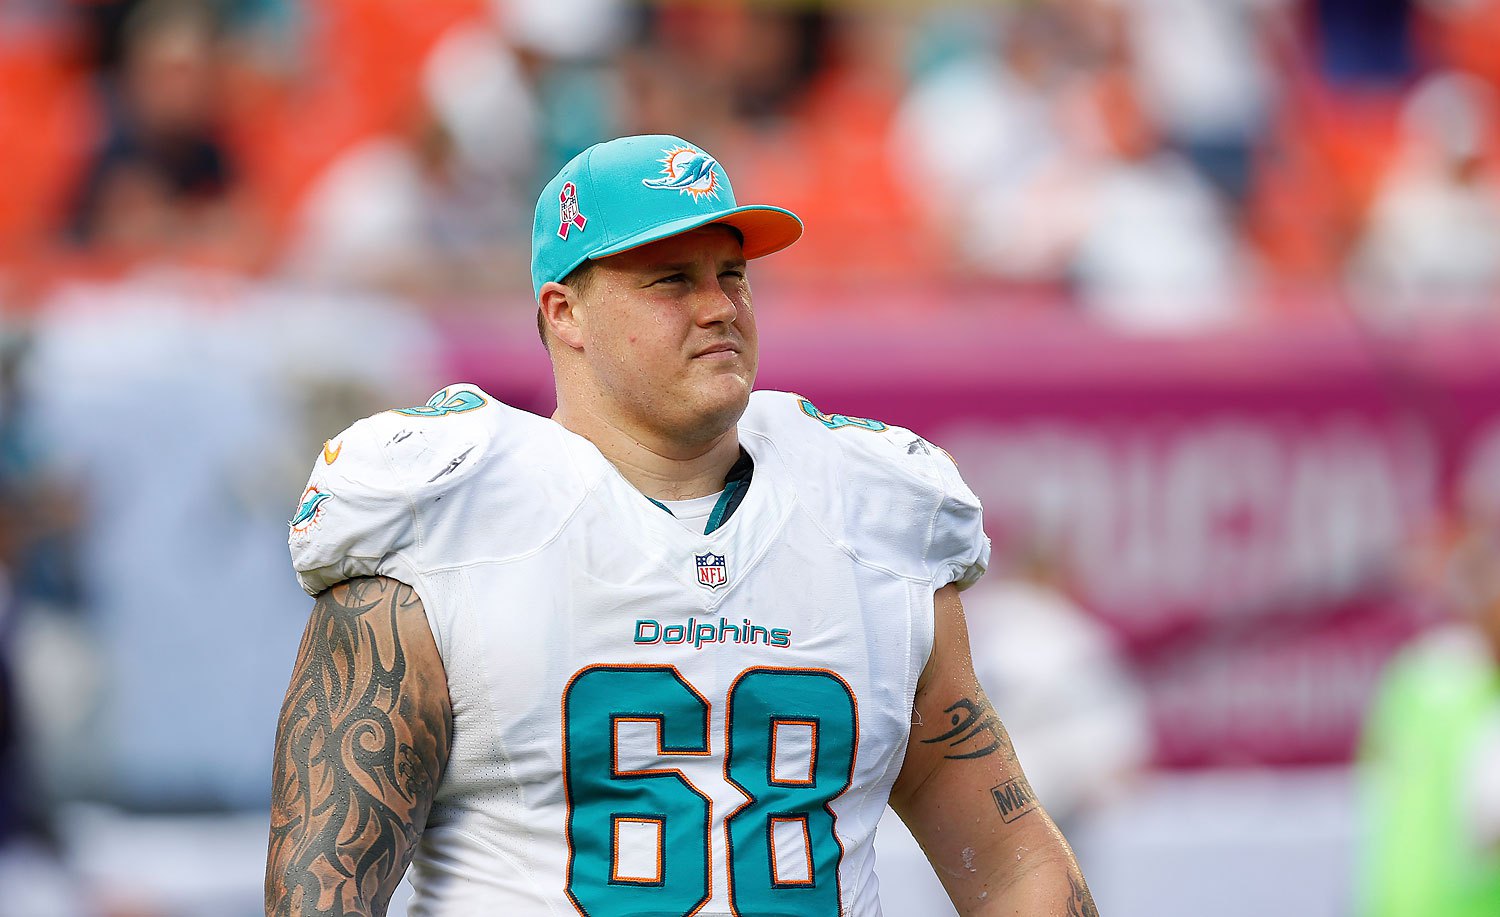 Miami Dolphins left guard Richie Incognito looks on during a game, October 6, 2013 in Miami Gardens. Incognito was accused of bullying teammate Jonathan Martin with threats and racial epithets.